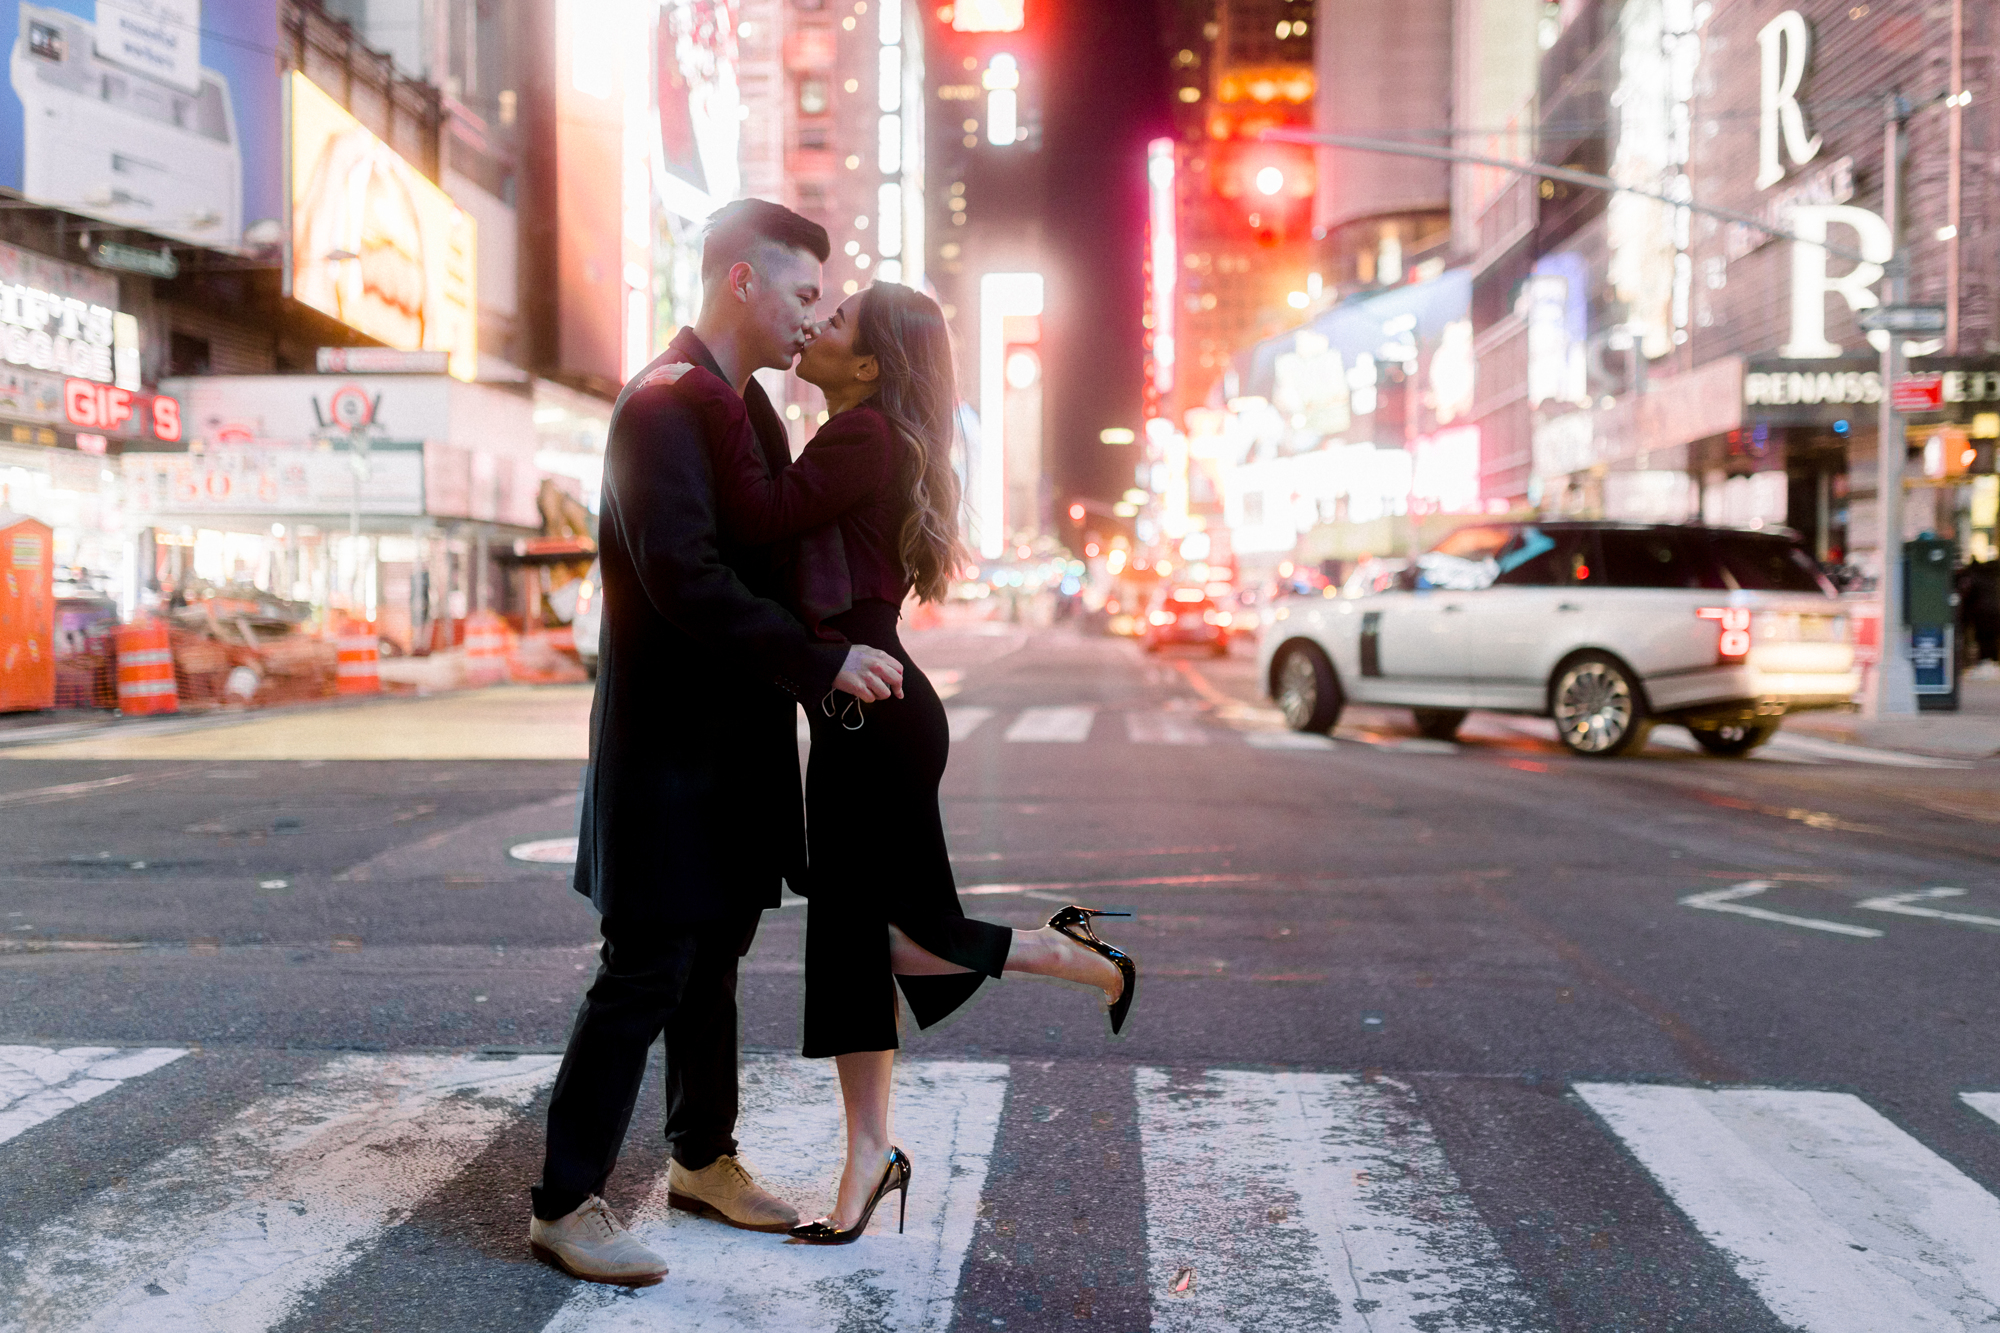 Cinematic Nighttime Winter Engagement Photos in New York's Iconic Times Square